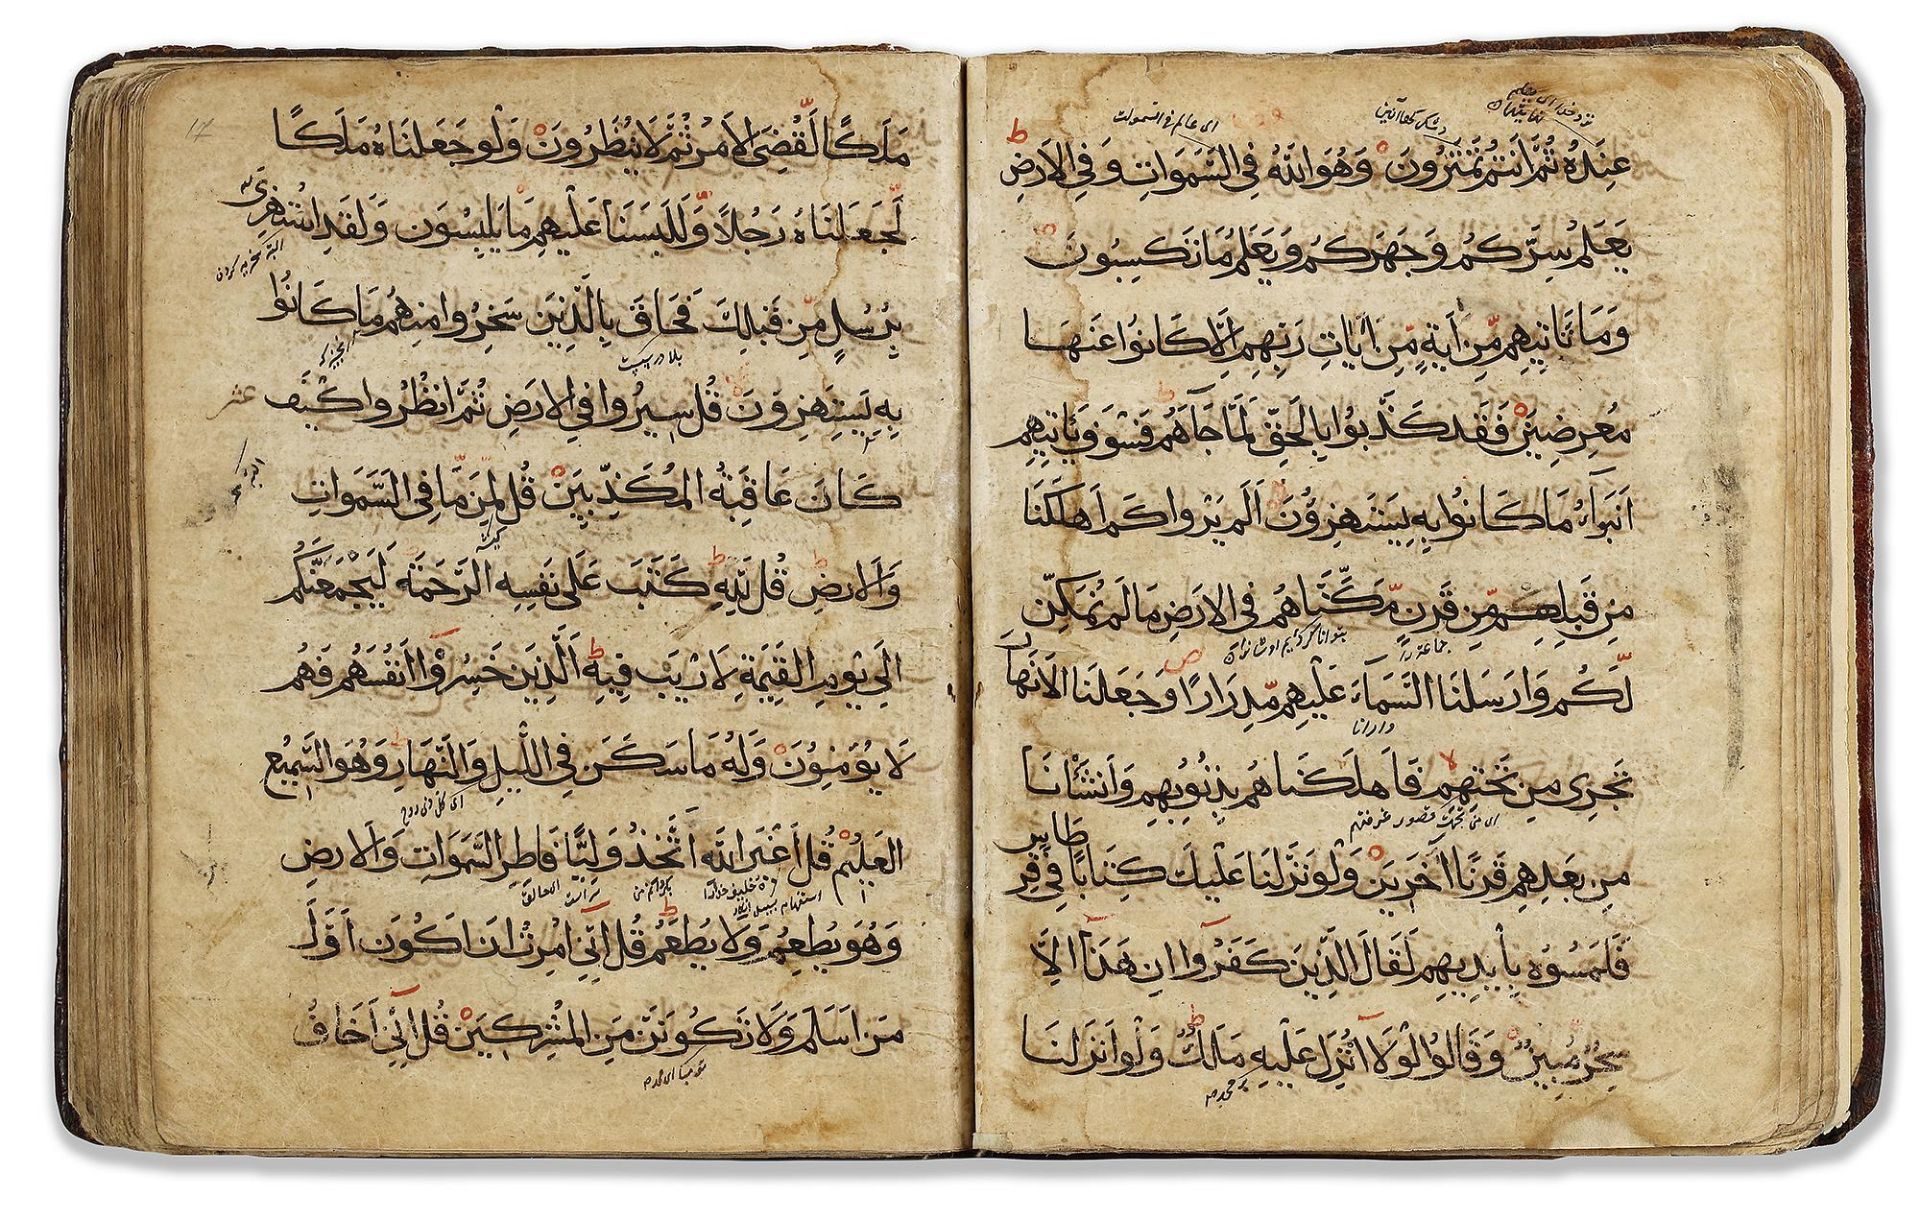 A QURAN JUZ, CENTRAL ASIA, 16TH-17TH CENTURY - Image 2 of 6